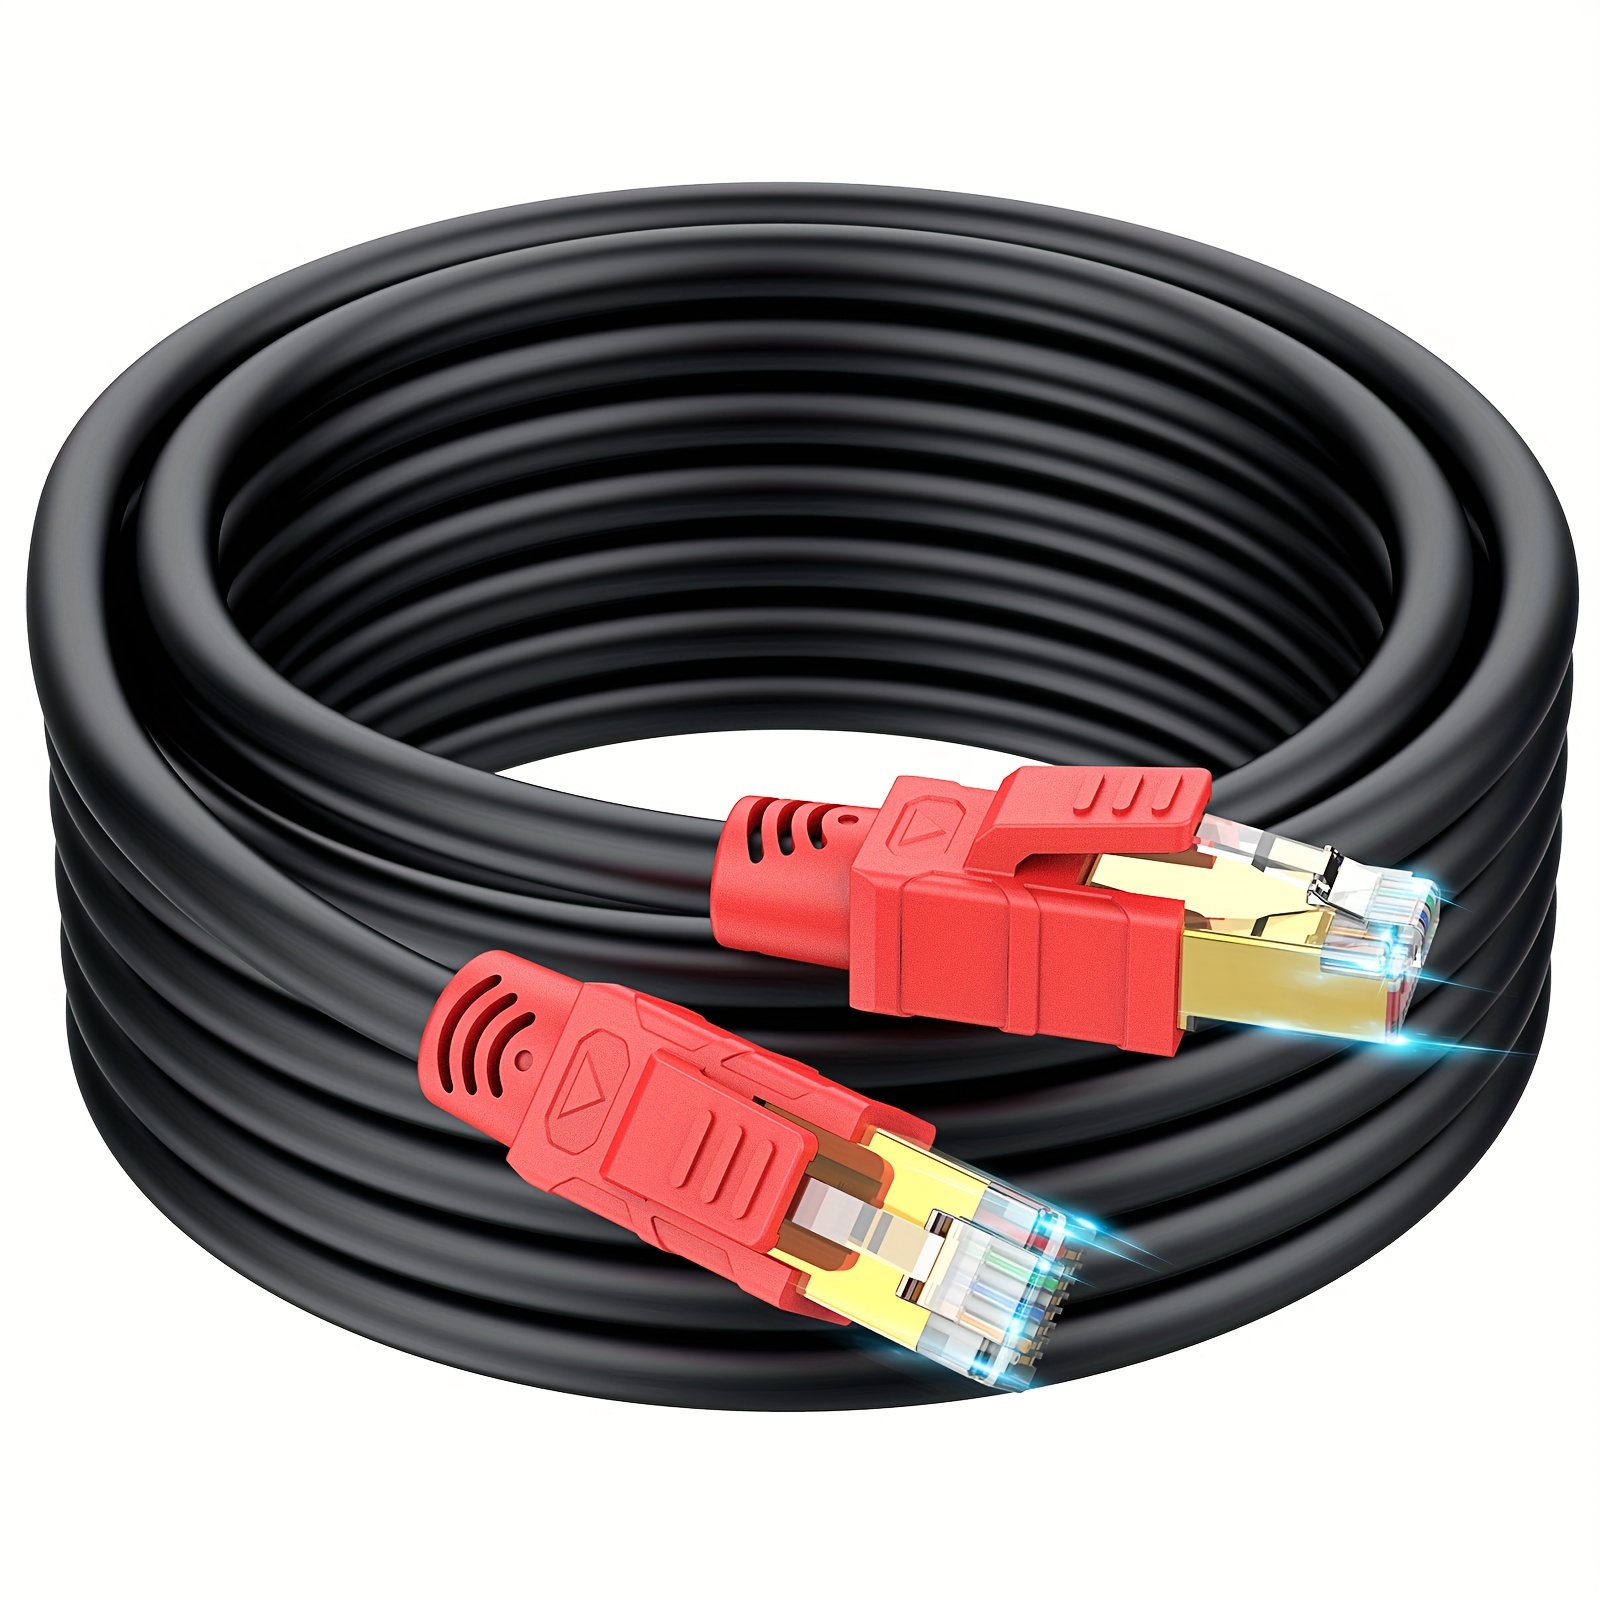  Cat 8 Ethernet Cable 10ft, Outdoor&Indoor, High Speed 26AWG  Internet Cable 40Gbps 2000Mhz, Shielded Direct Burial RJ45 Network Cable  for Modem/Router/Gaming/Xbox : Electronics